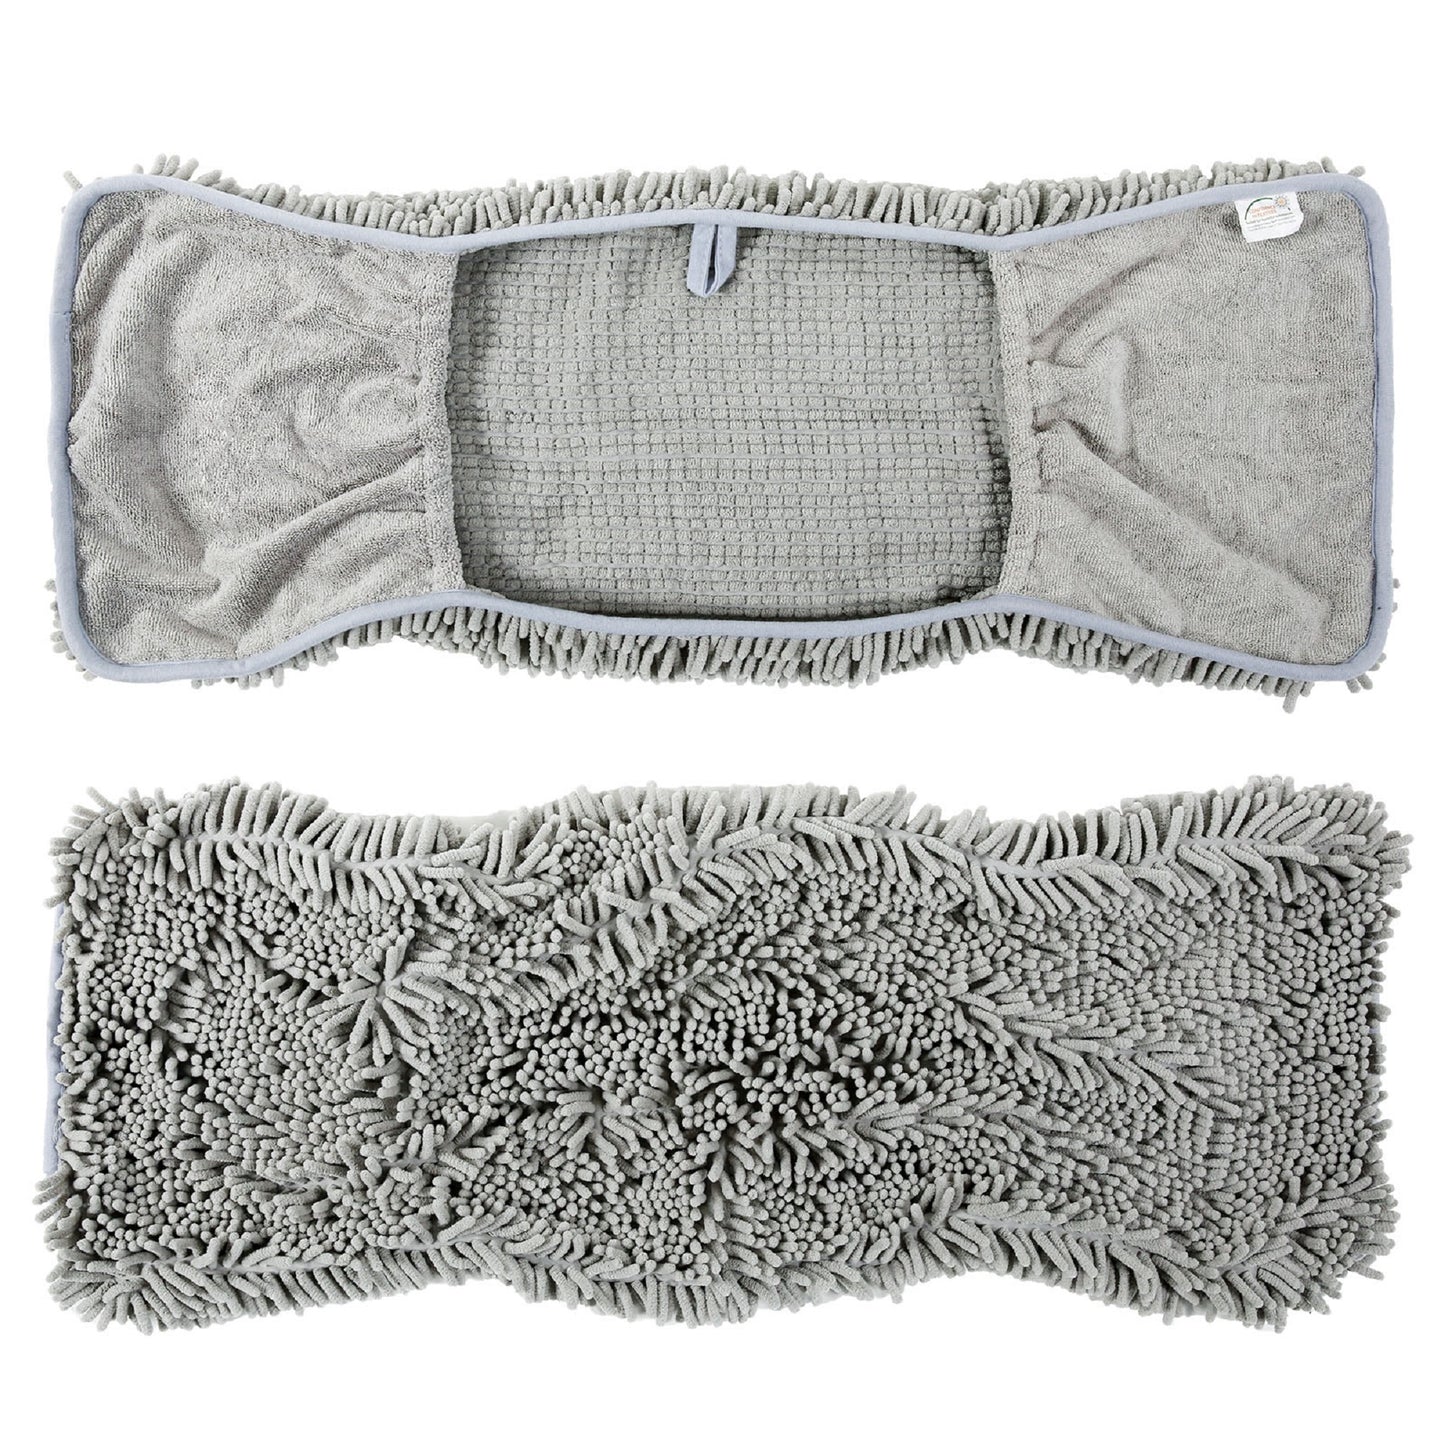 2 Pack Luxury Absorbent Dog Towels, (35"x15") Extra Large Microfiber Quick Drying Dog Shammy with Hand Pockets Pet Towel for Dog and Cat, Machine Washable (Grey+Grey)